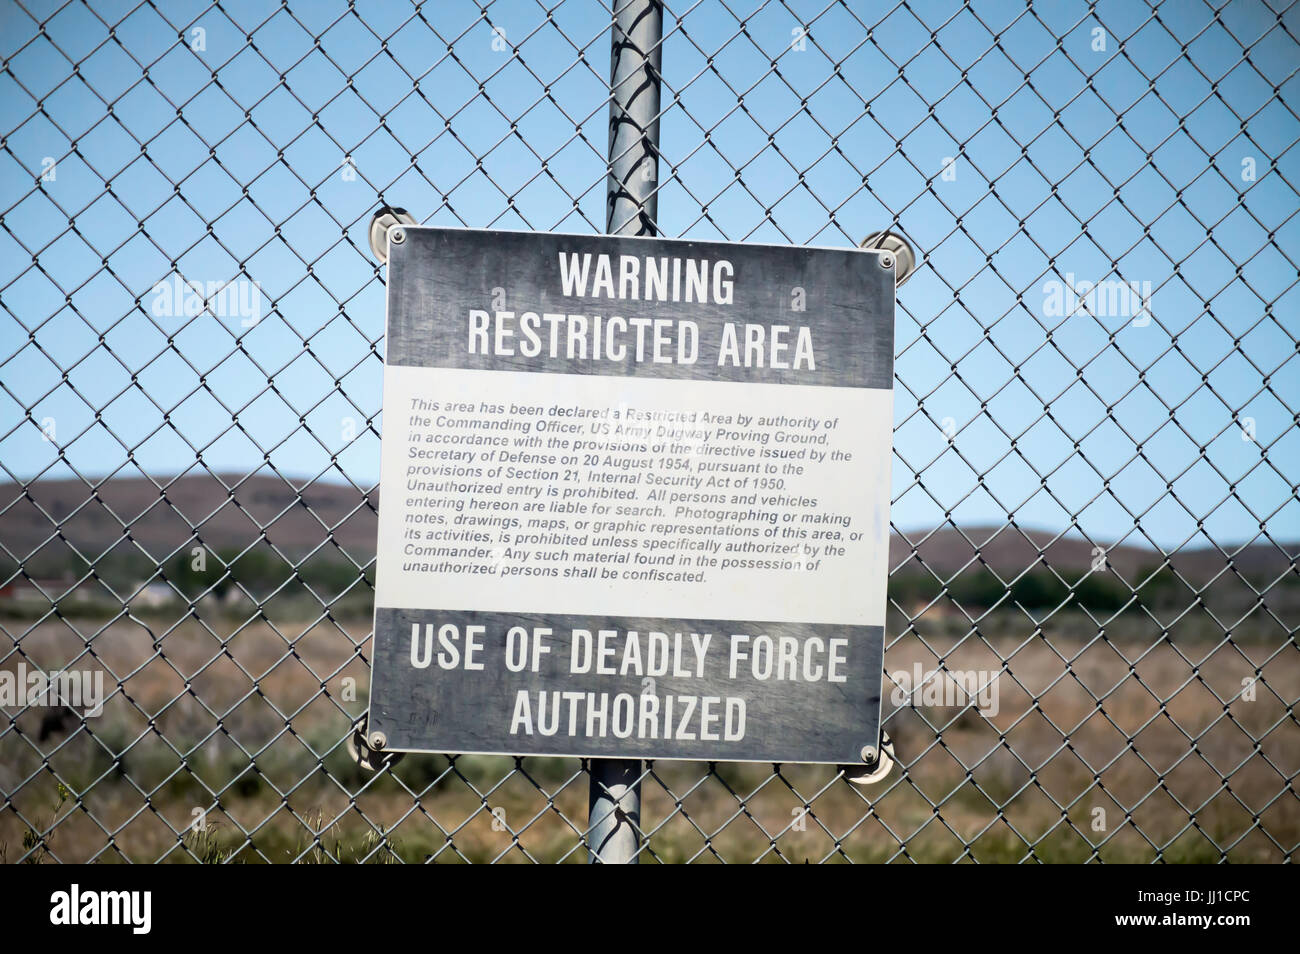 Warning Restricted Area sign, Deadly force authorized sign hung on a chain link fence. Stock Photo